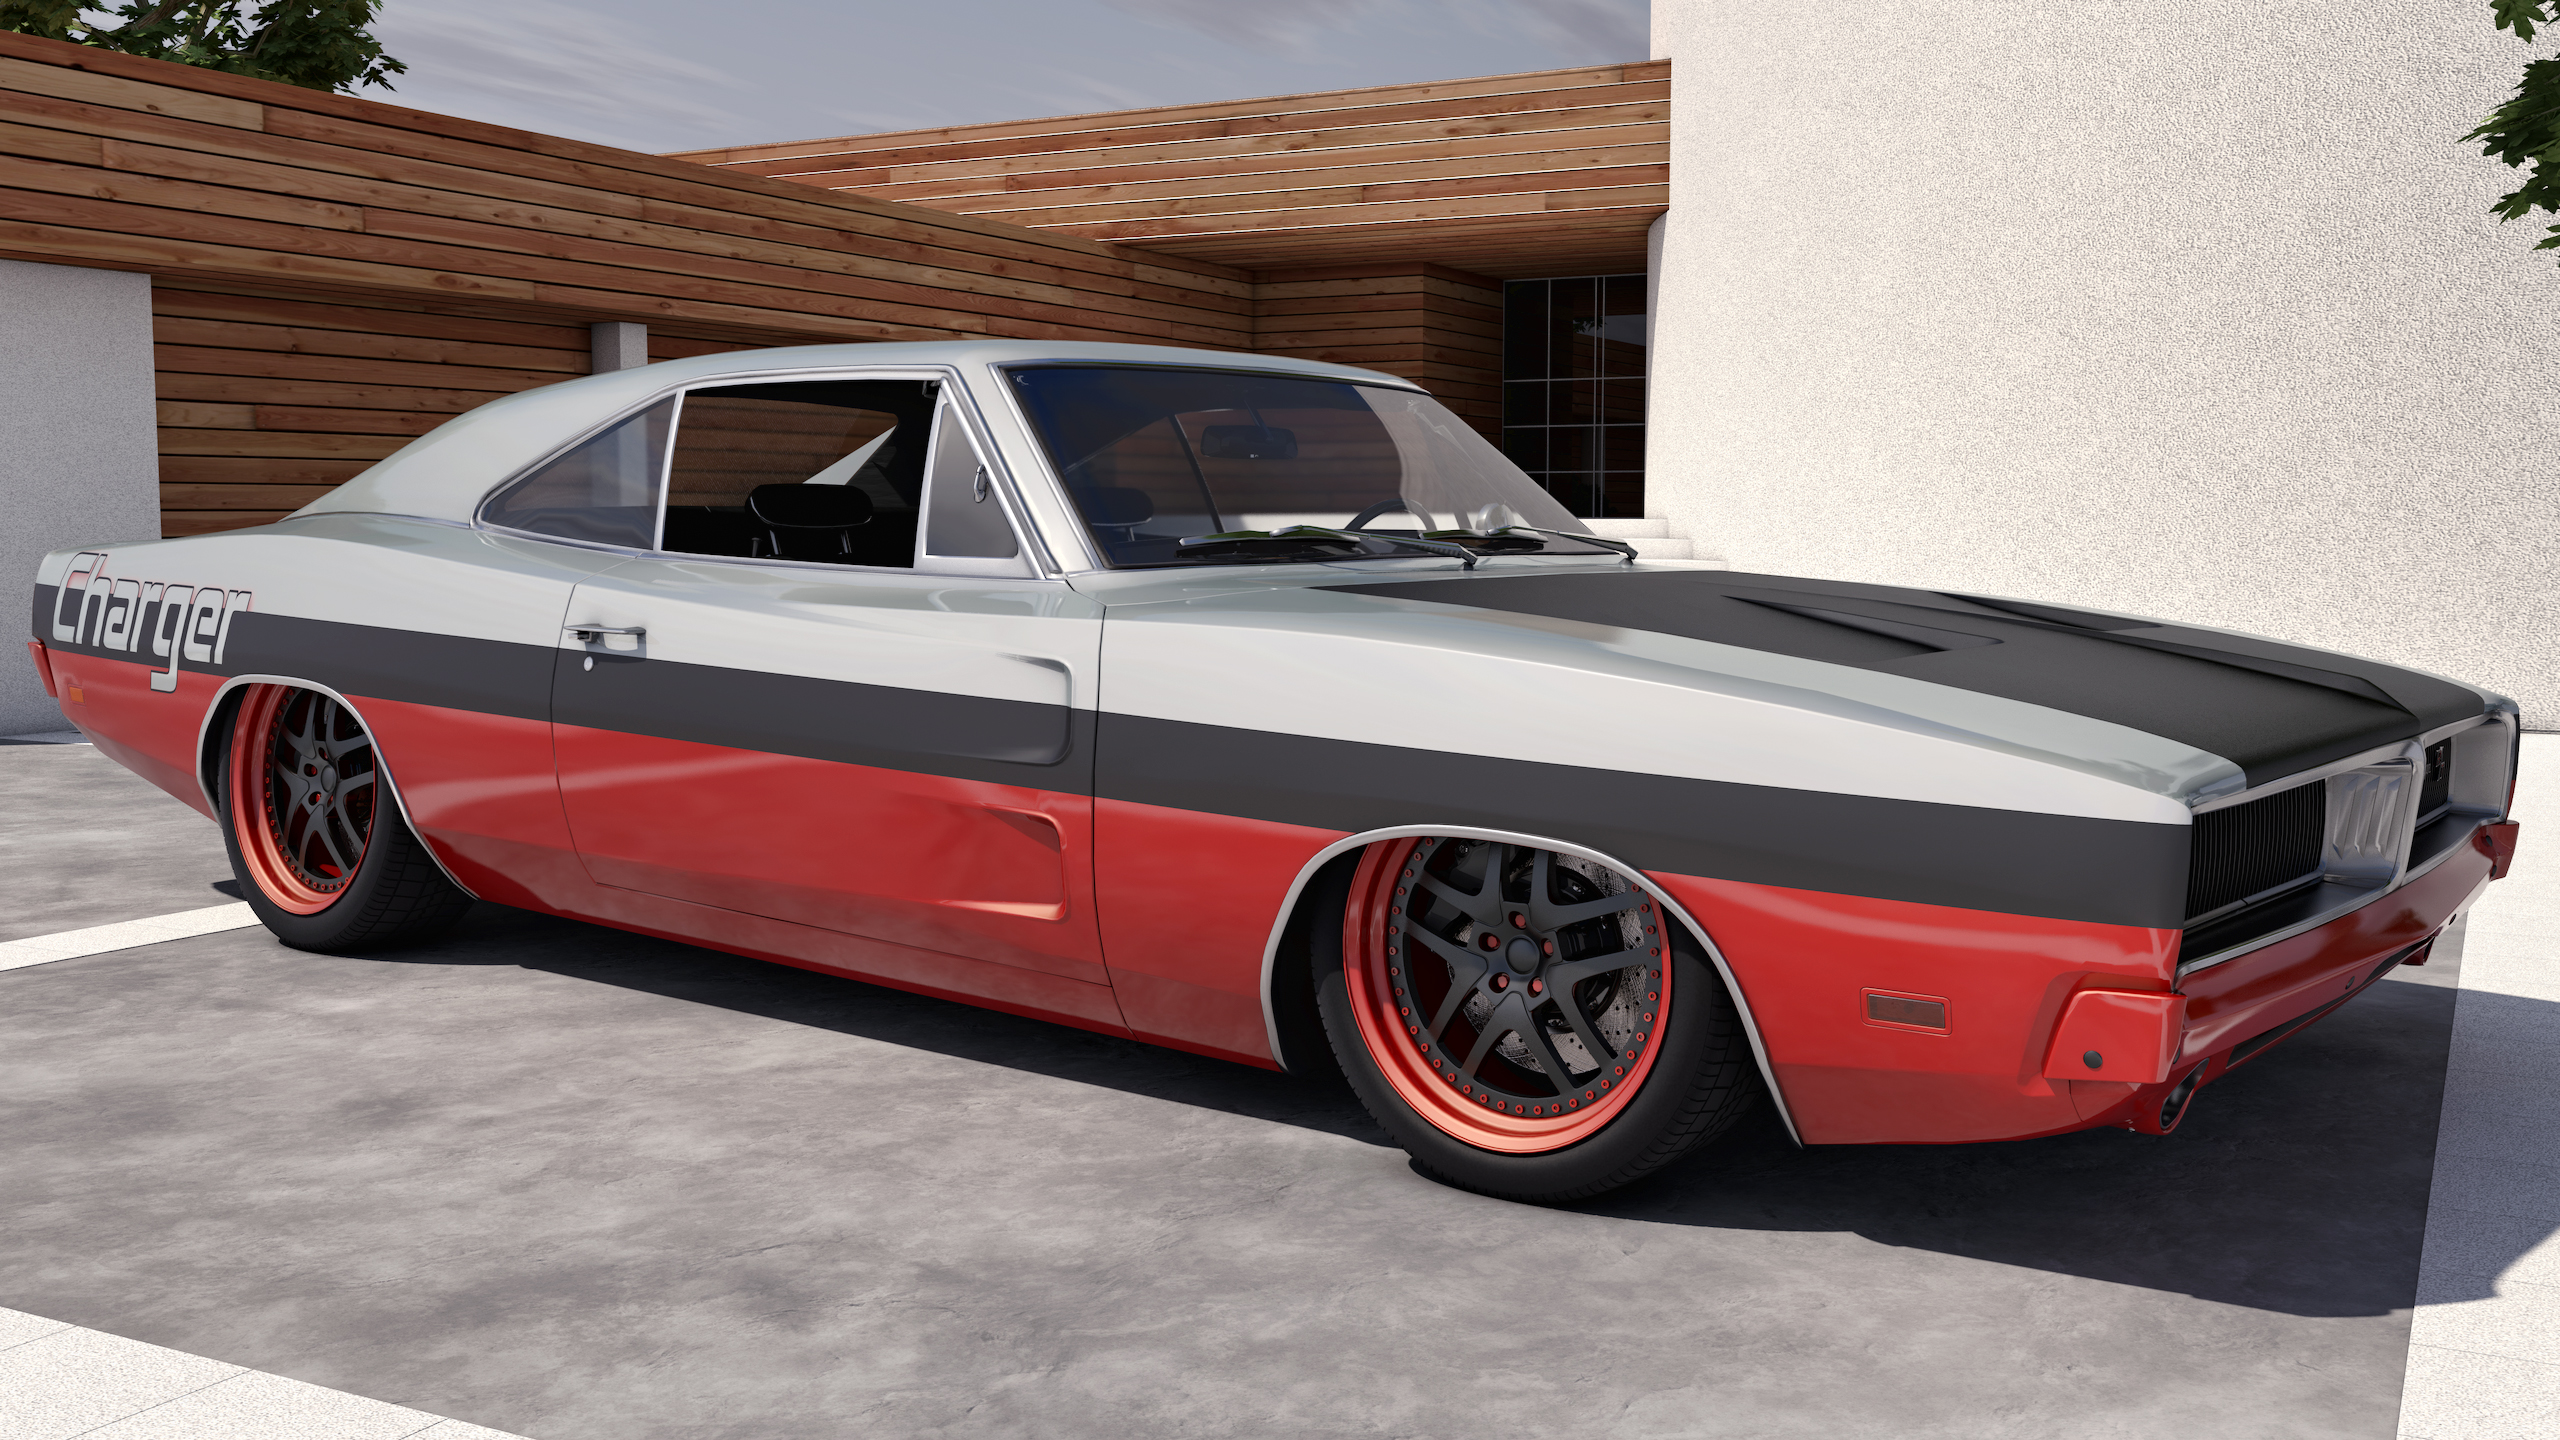 1969 Dodge Charger R/T by SamCurry on DeviantArt